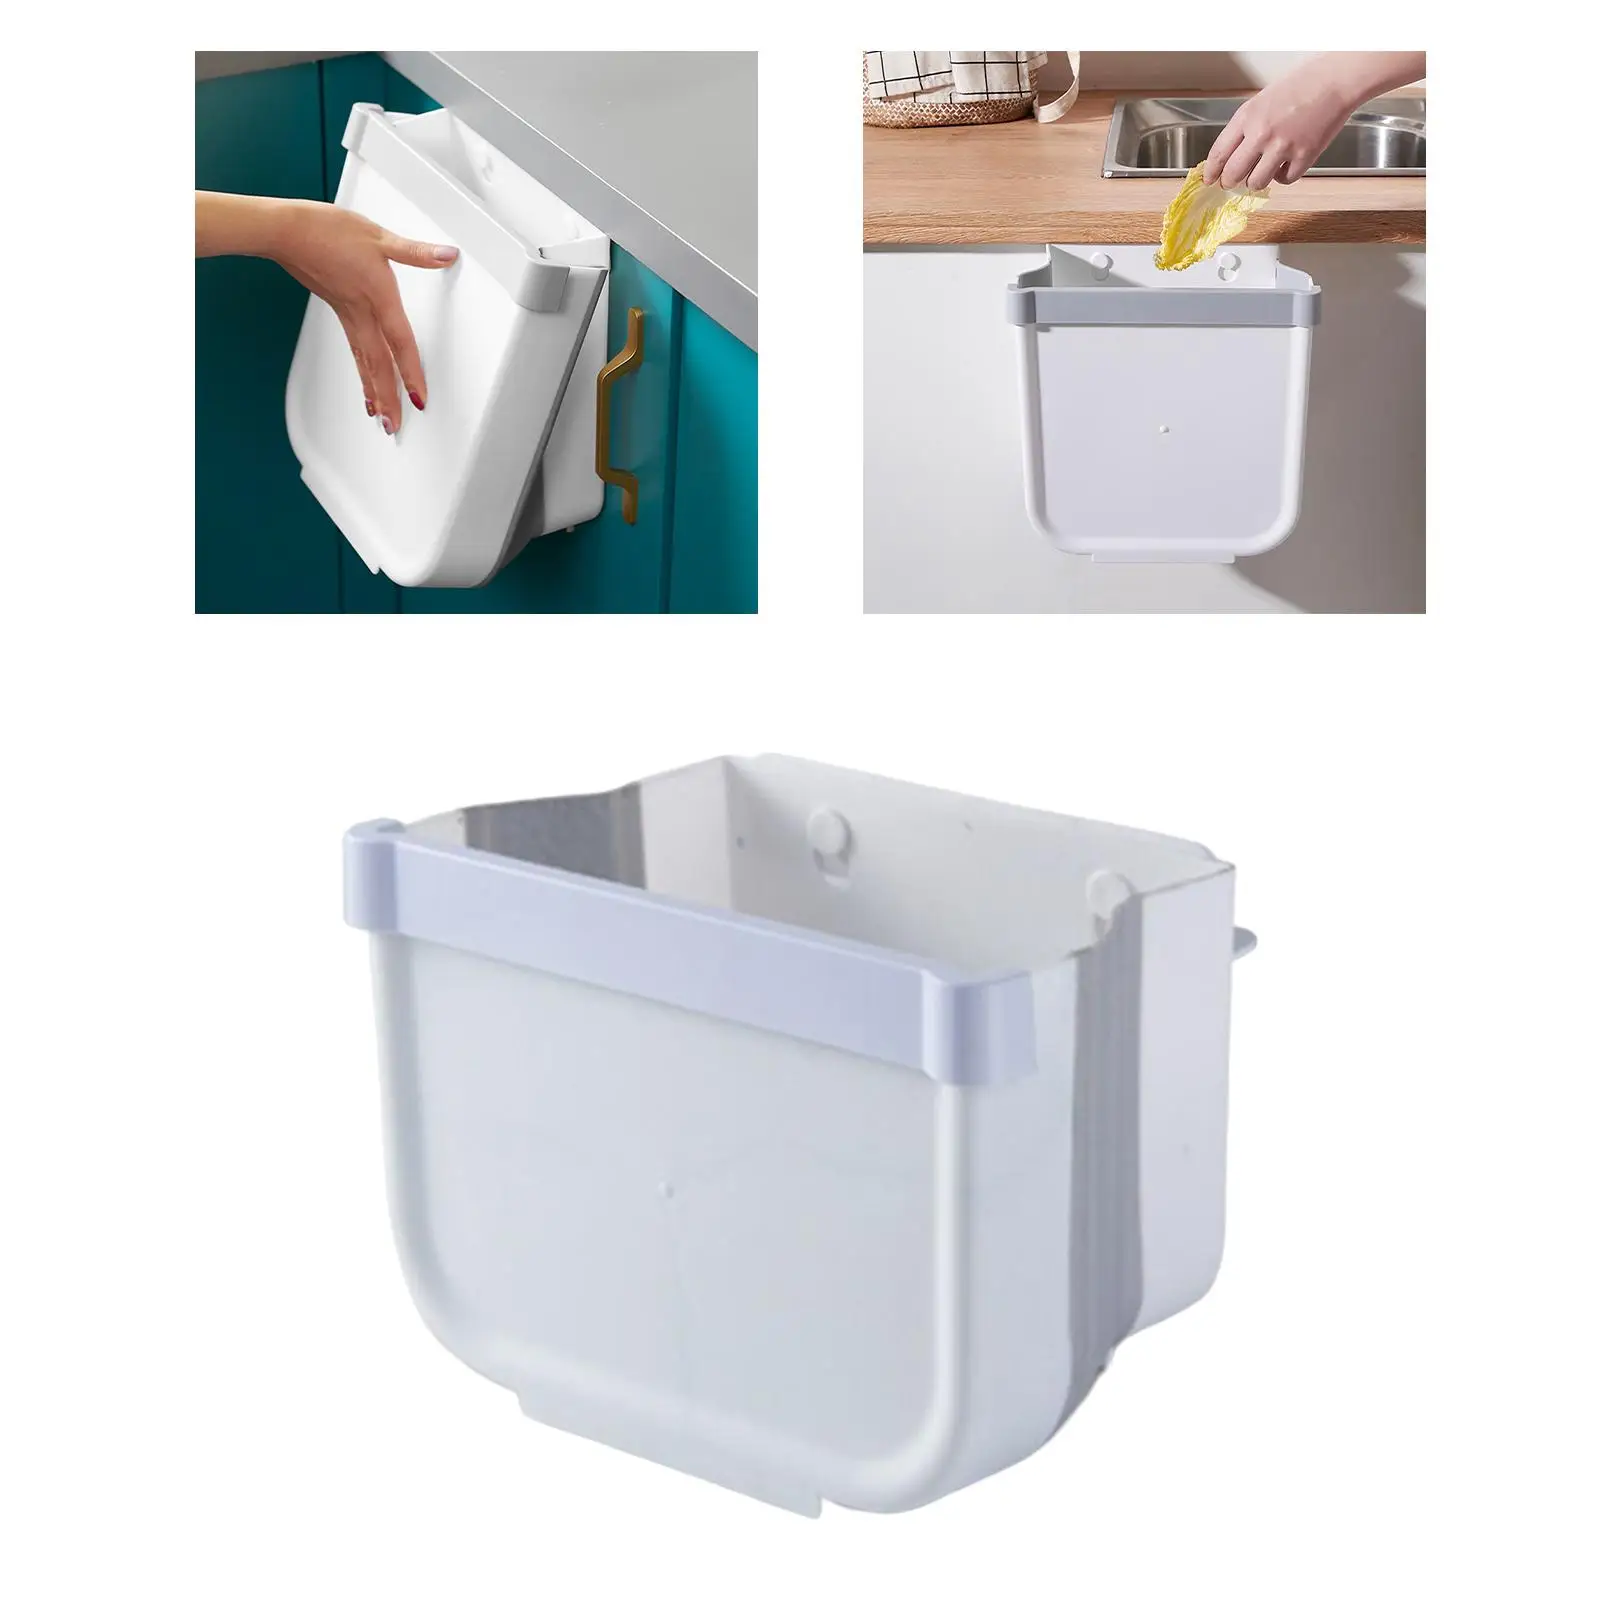 Collapsible Wall Mounted Trash Can Hanging Small Waste Basket Garbage Bin Dustbin for Cabinet Camping Bedroom Door Office